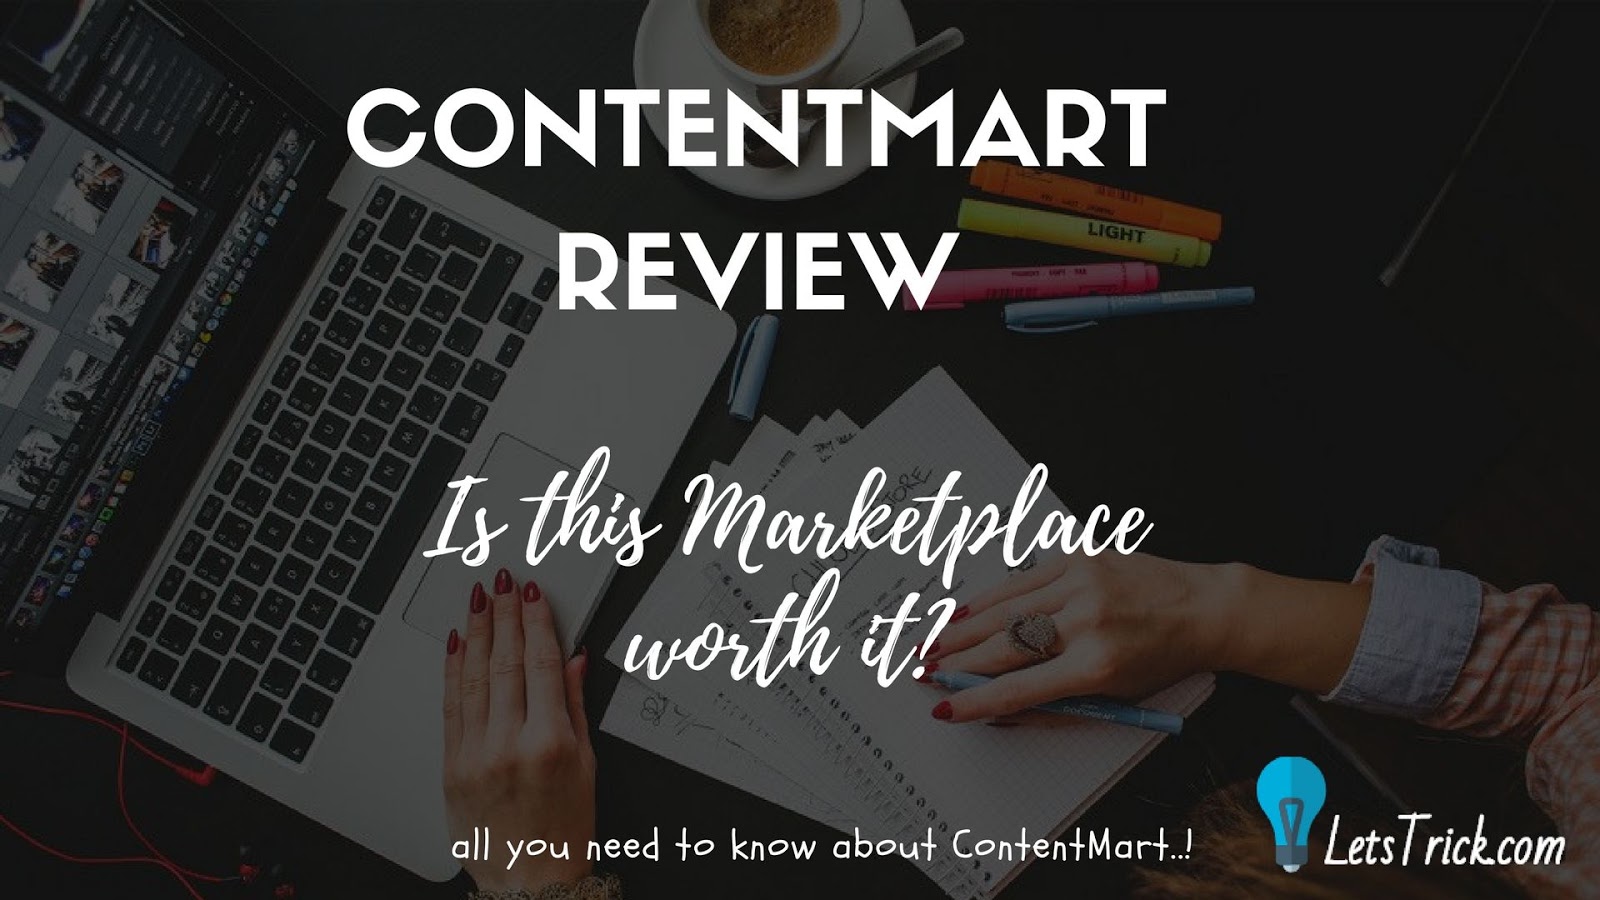 contentmart review best content writing services